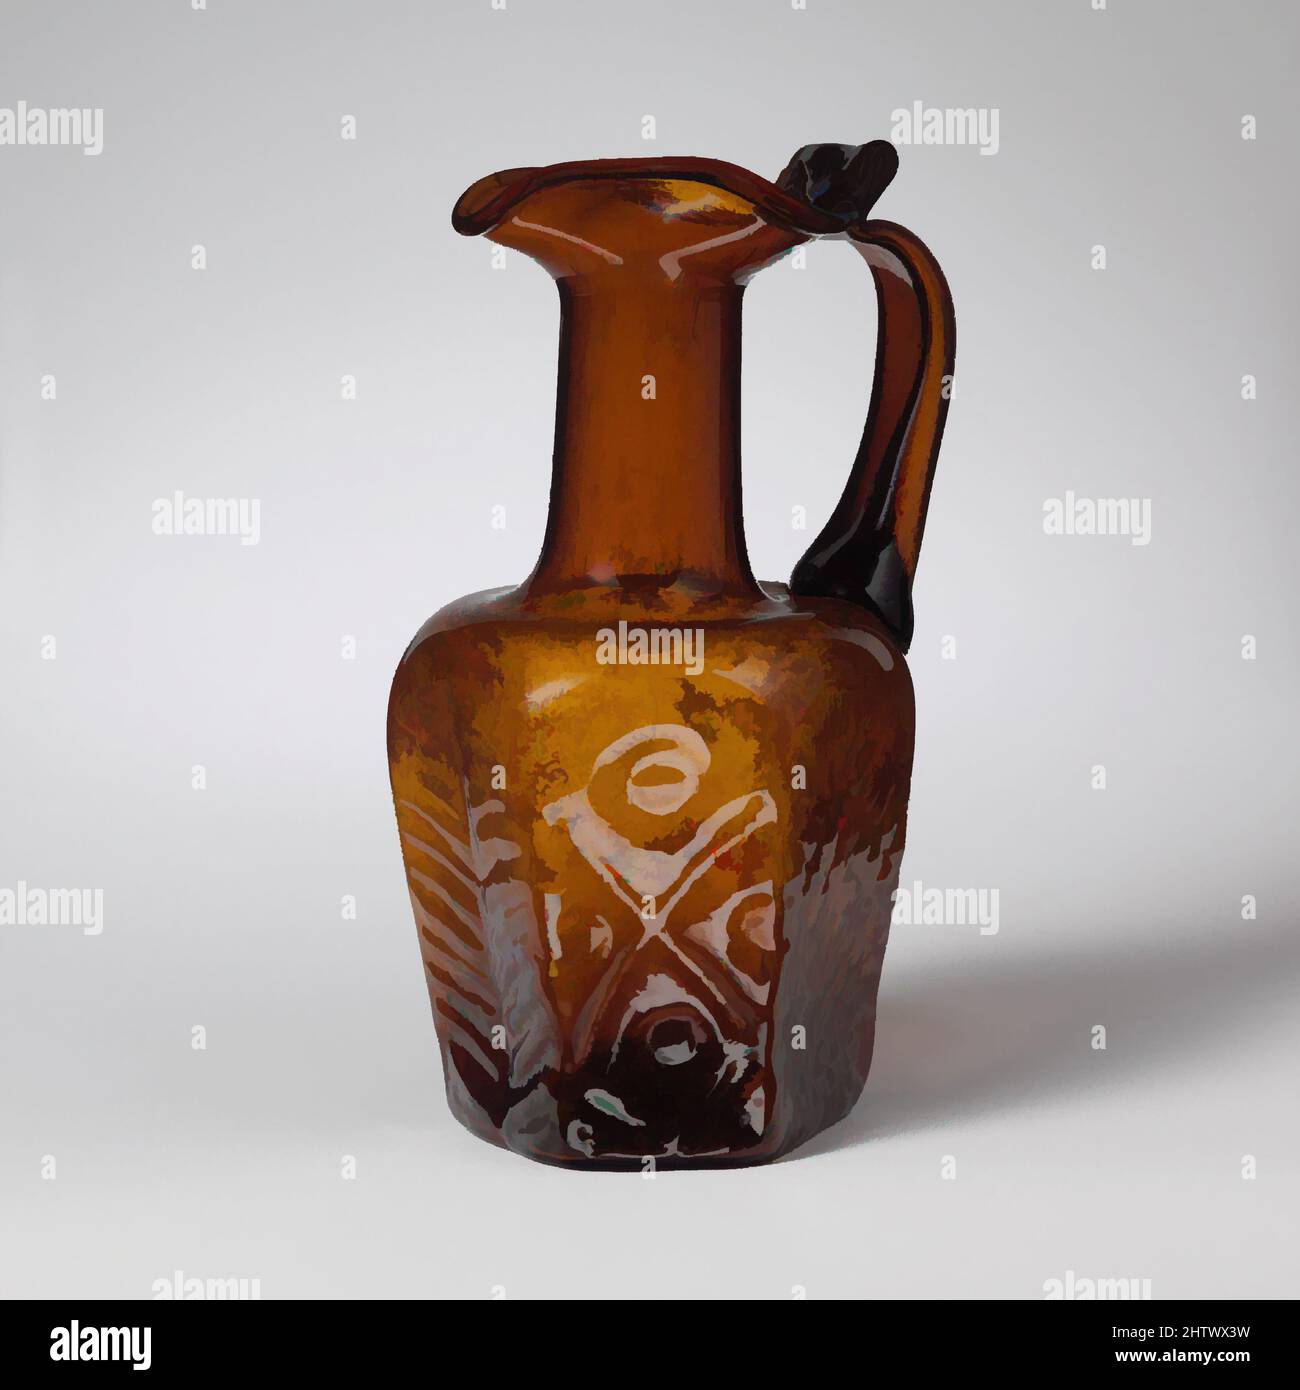 Art inspired by Glass hexagonal jug, Early Byzantine, 6th–early 7th century A.D., Roman, Palestinian, Glass; mold-blown, H. 5 3/8 in. (13.7 cm), Glass, Translucent deep yellow brown, with same color handle., Trefoil rim with thick rounded edge; shallow, funnel-shaped mouth; cylindrical, Classic works modernized by Artotop with a splash of modernity. Shapes, color and value, eye-catching visual impact on art. Emotions through freedom of artworks in a contemporary way. A timeless message pursuing a wildly creative new direction. Artists turning to the digital medium and creating the Artotop NFT Stock Photo